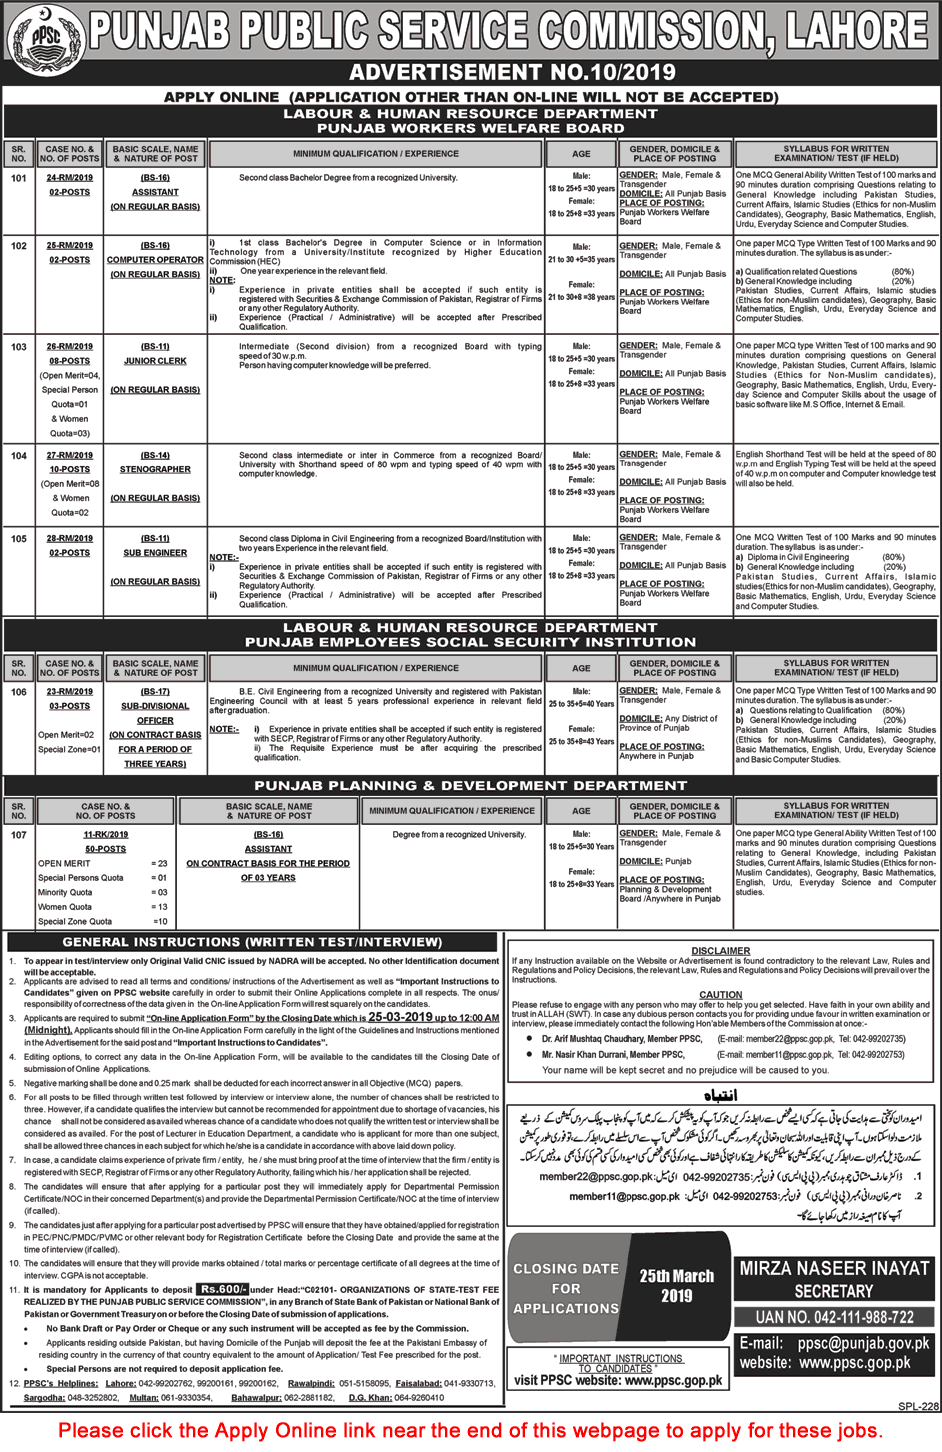 PPSC Jobs March 2019 Apply Online Consolidated Advertisement No 10/2019 Latest